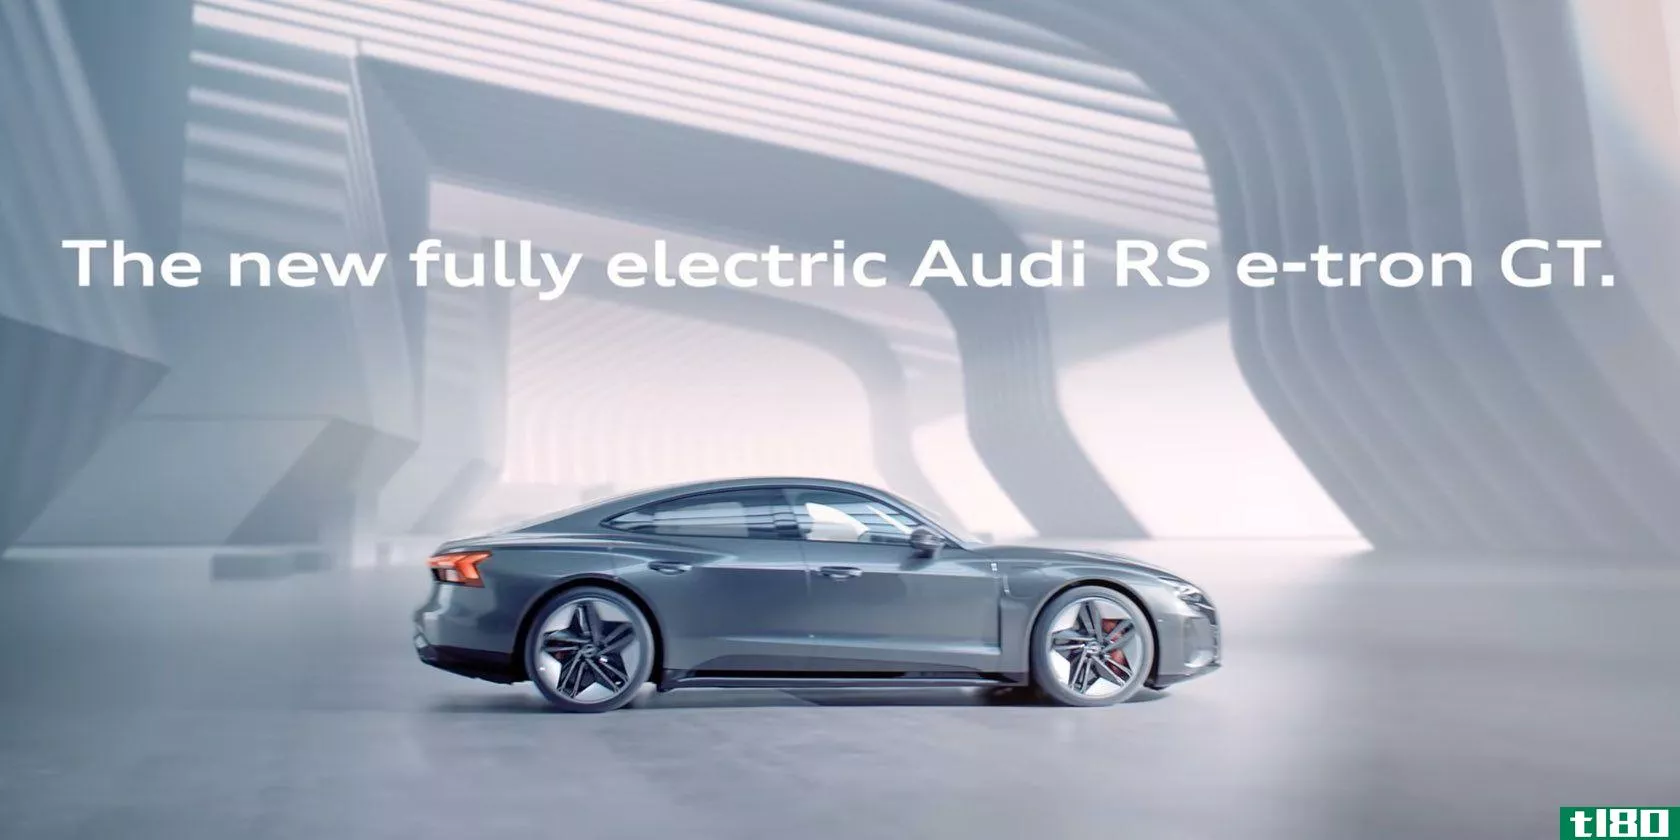 A still from Volkswagen's commercial for the Audi RS E-tron GT electric vehicle